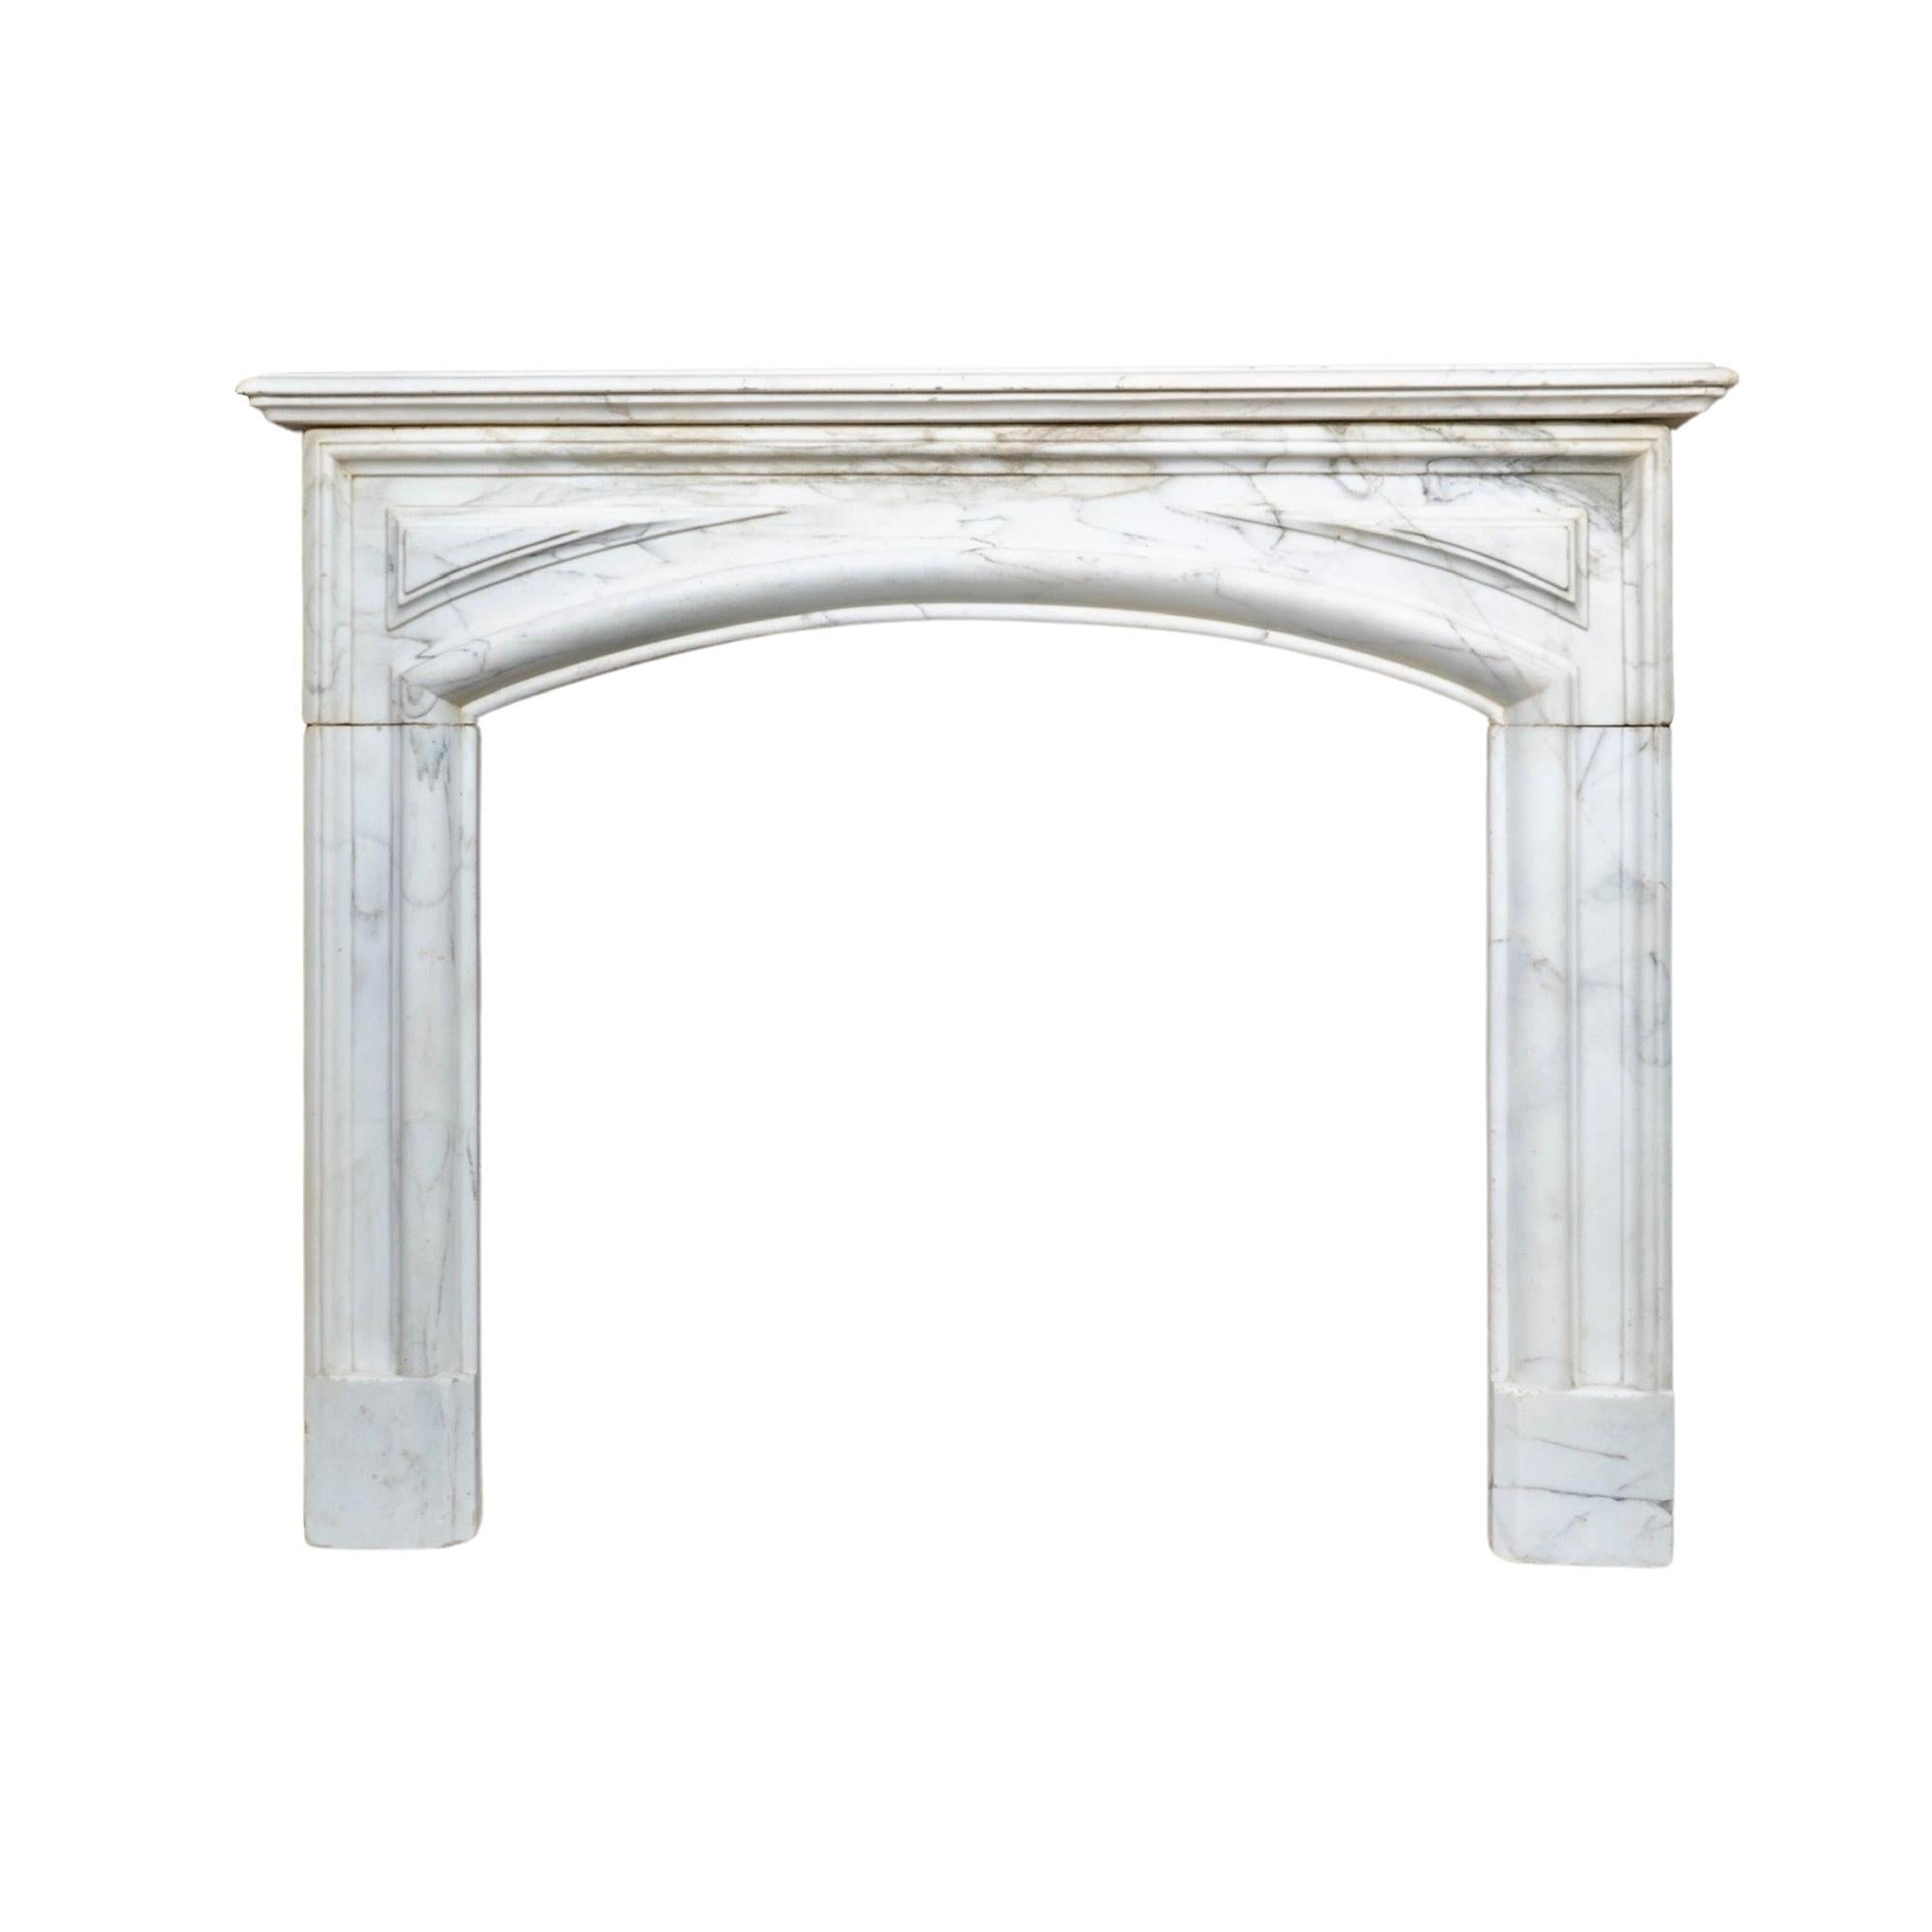 This white Carrara marble mantel, from 1890's France, boasts elegant bolection-style carvings. Crafted with the finest Carrara marble, this mantel adds a touch of sophistication and history to any room. Expertly made and exquisite in design, this